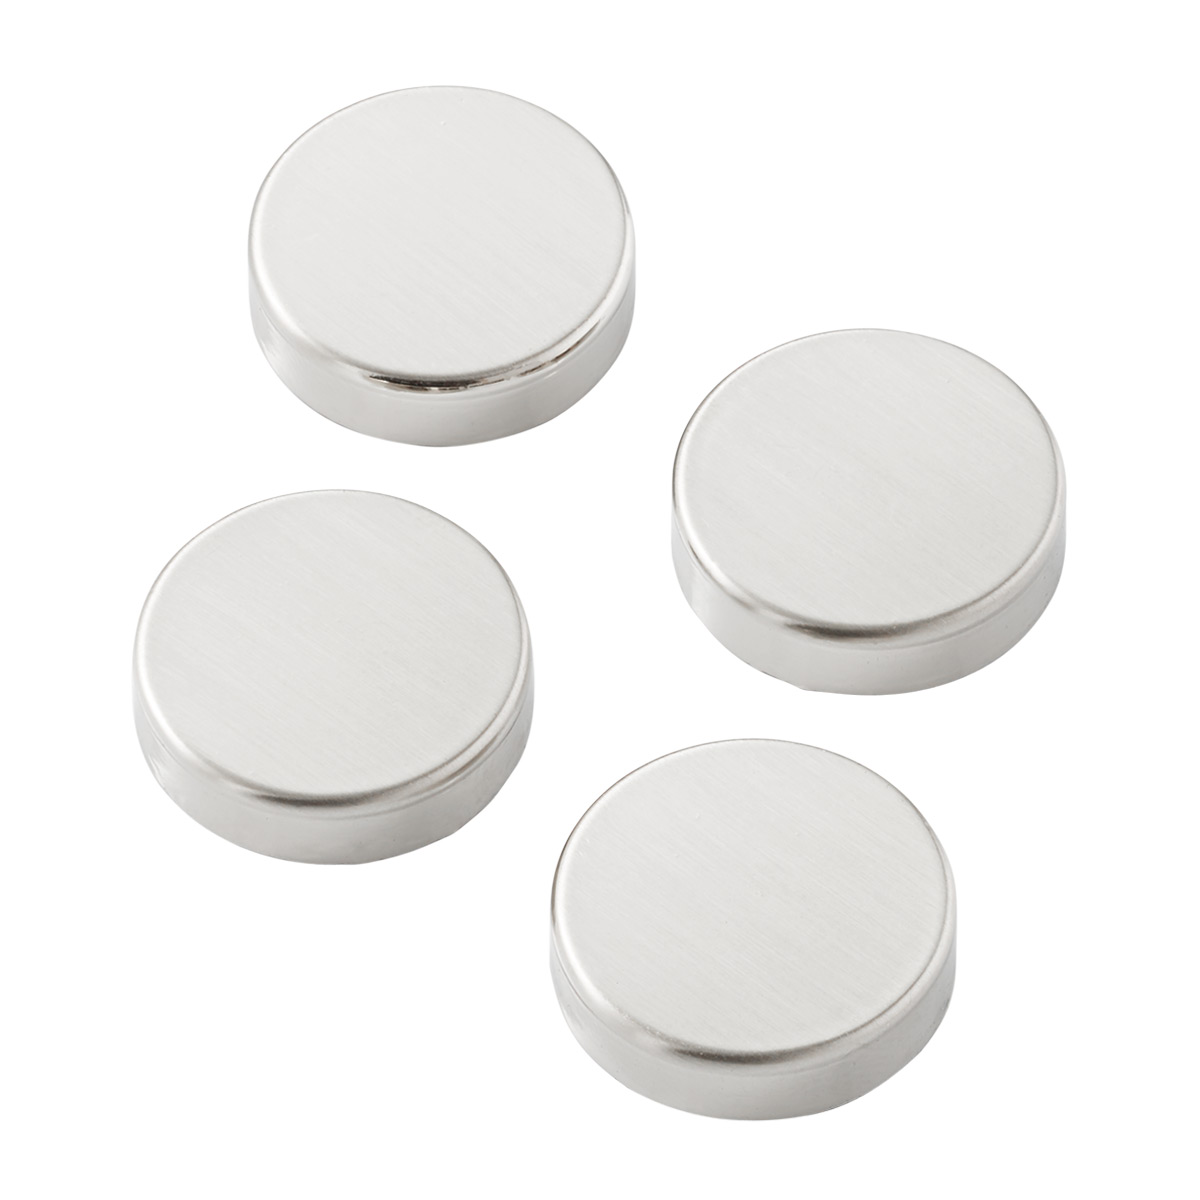 https://www.containerstore.com/catalogimages/353980/10058265-Snap!-strong-magnets-stainl.jpg